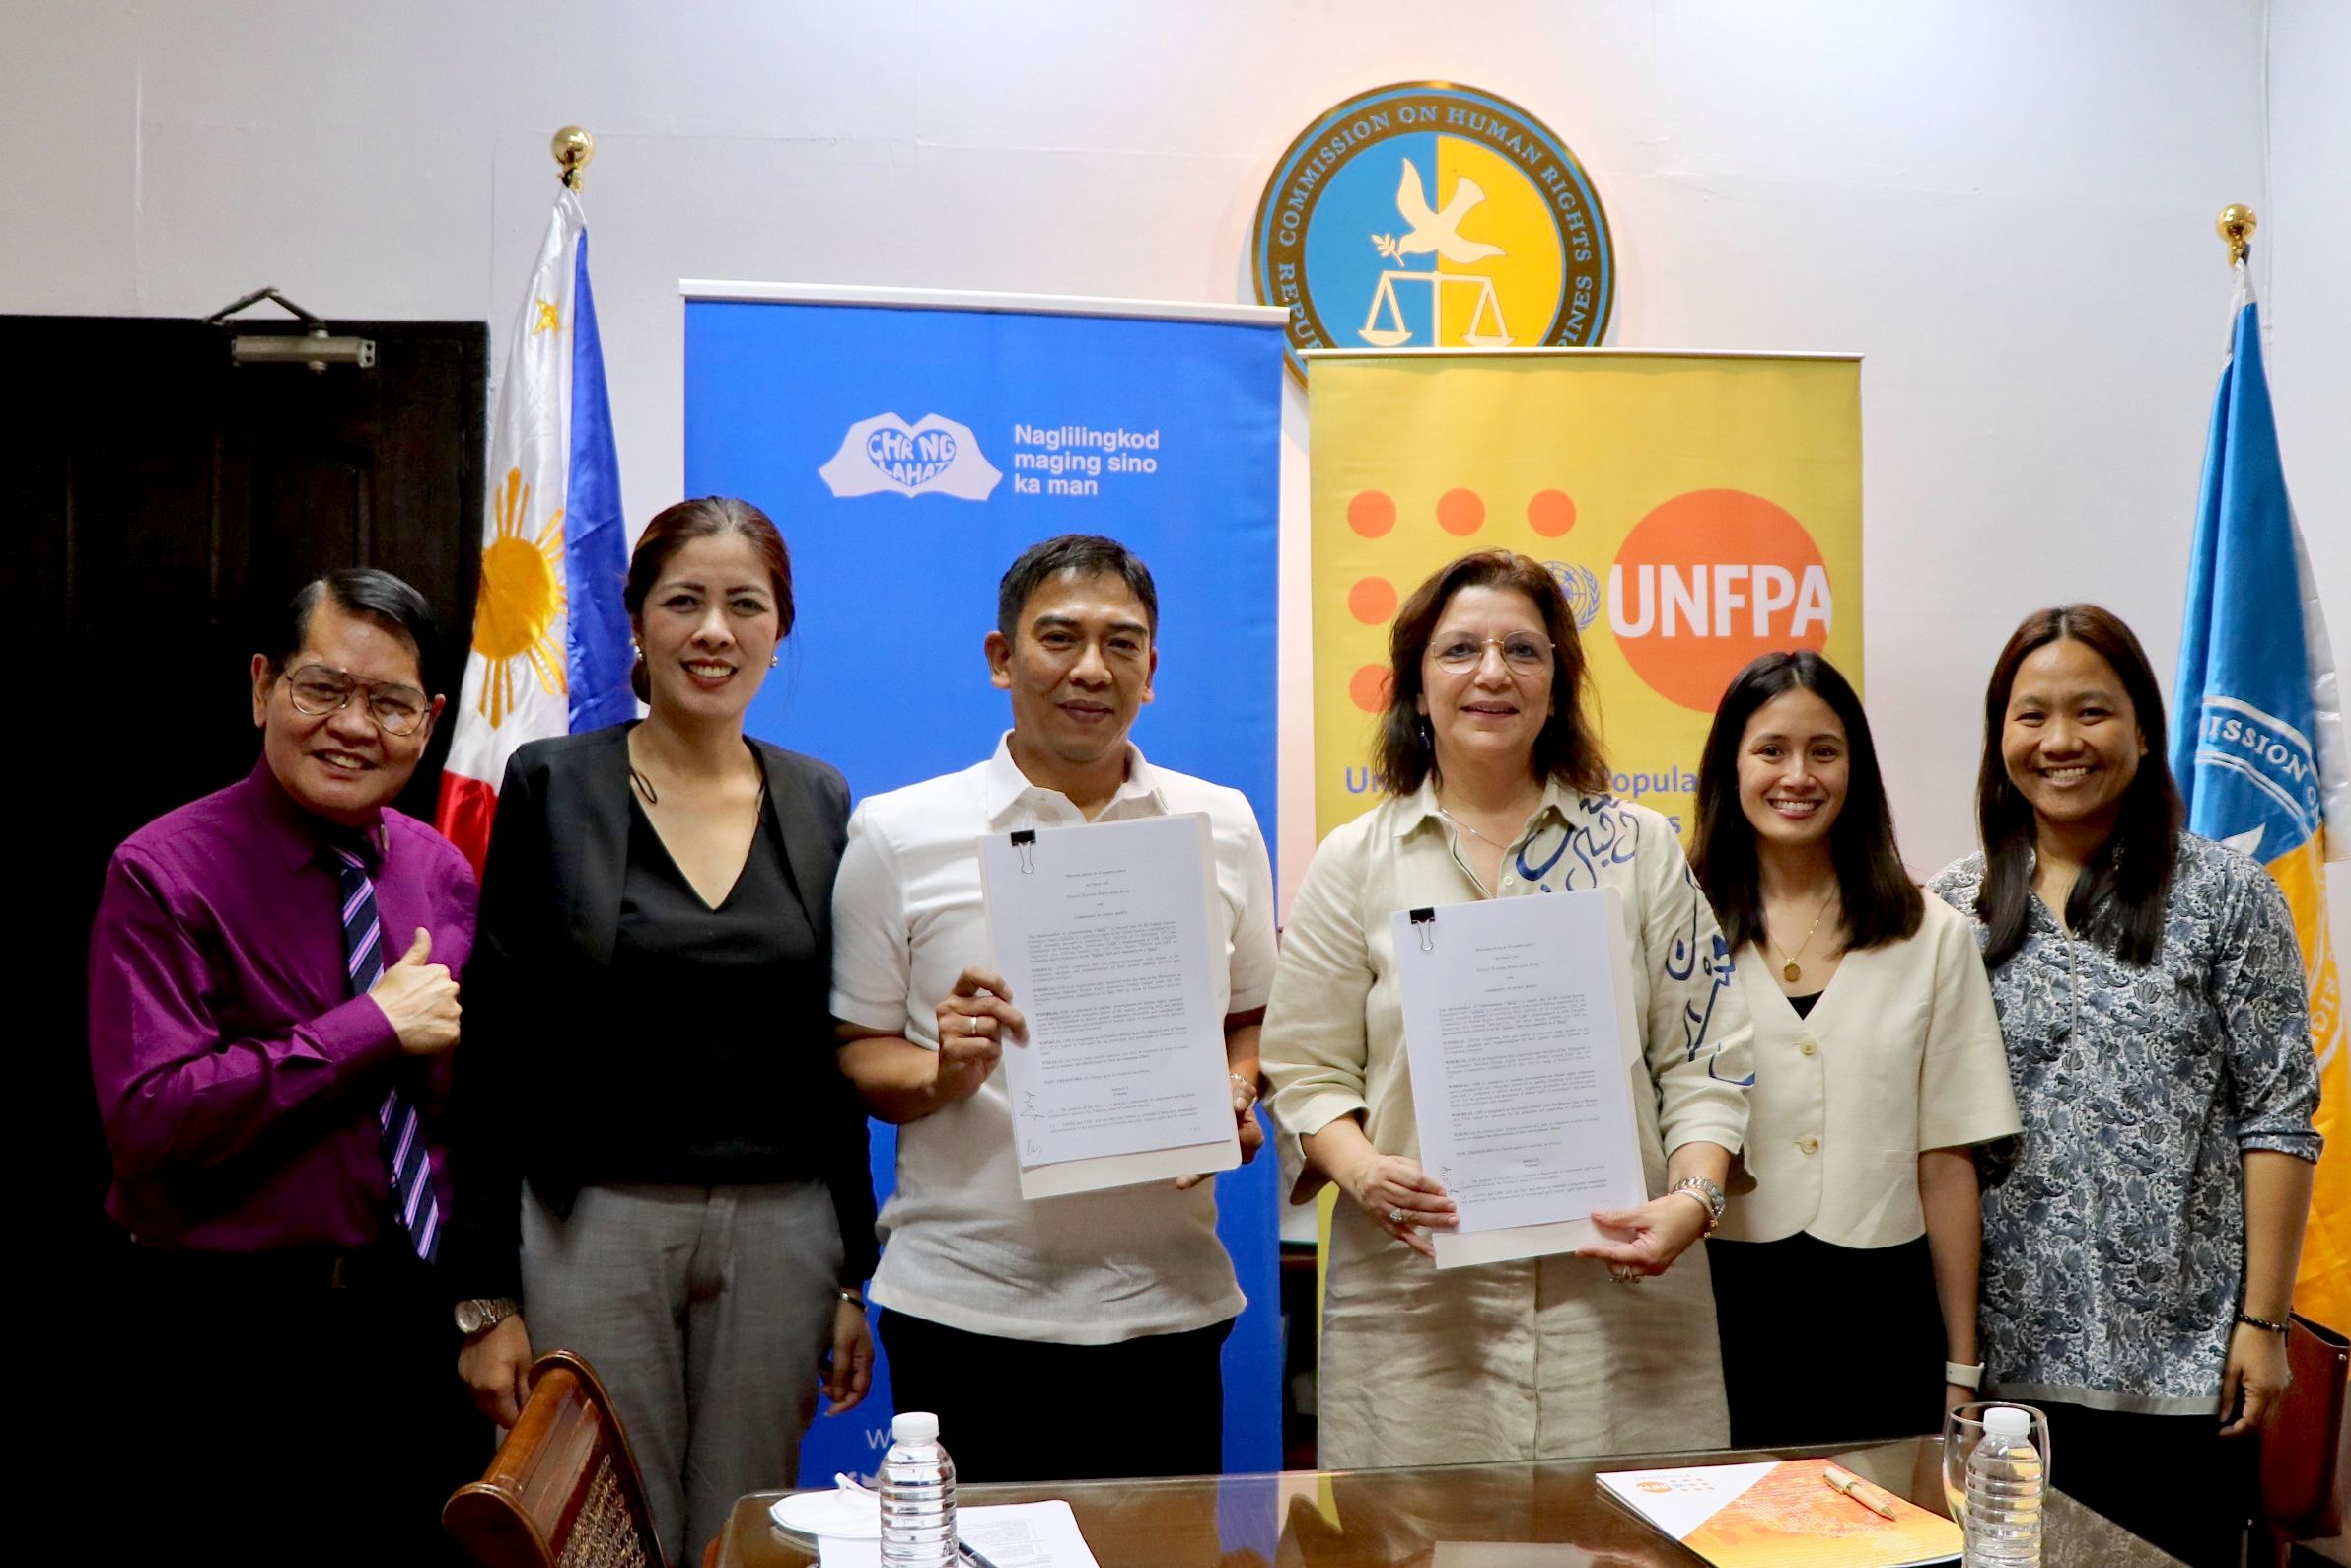 CHR and UNFPA after signing the memorandum of understanding